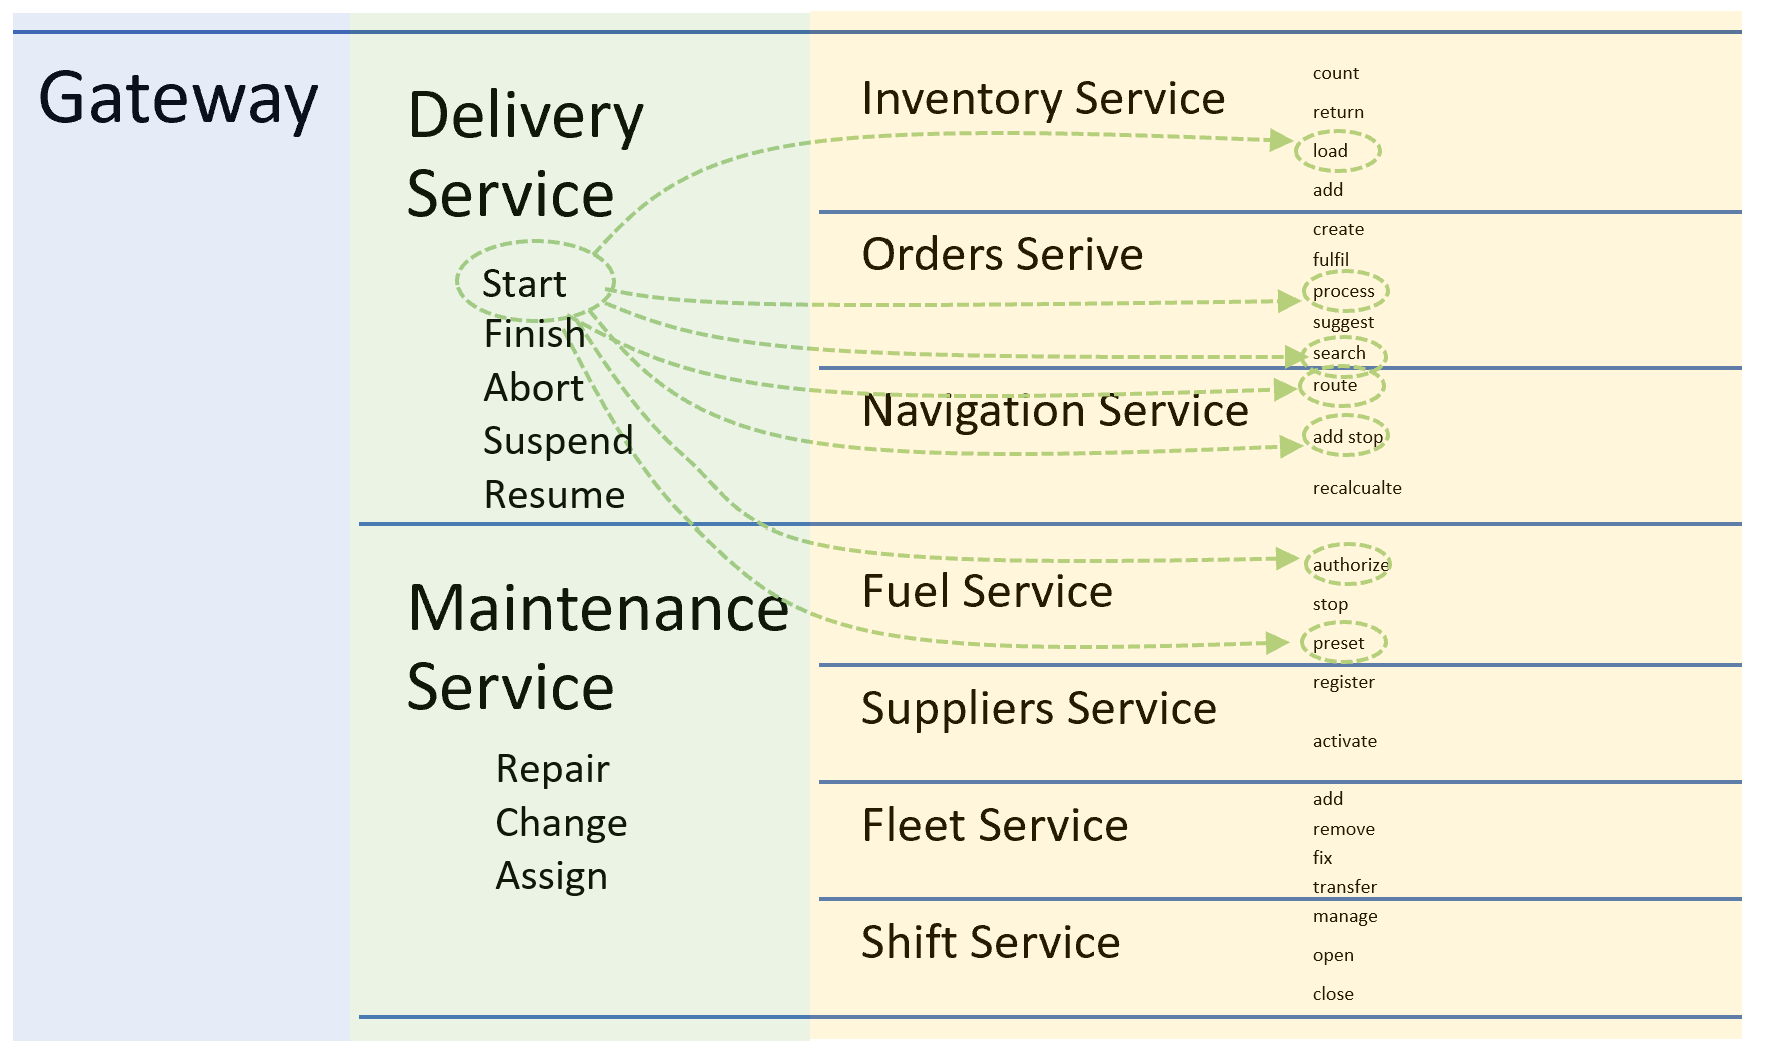 Delivery service orchestrates domain services in business flow